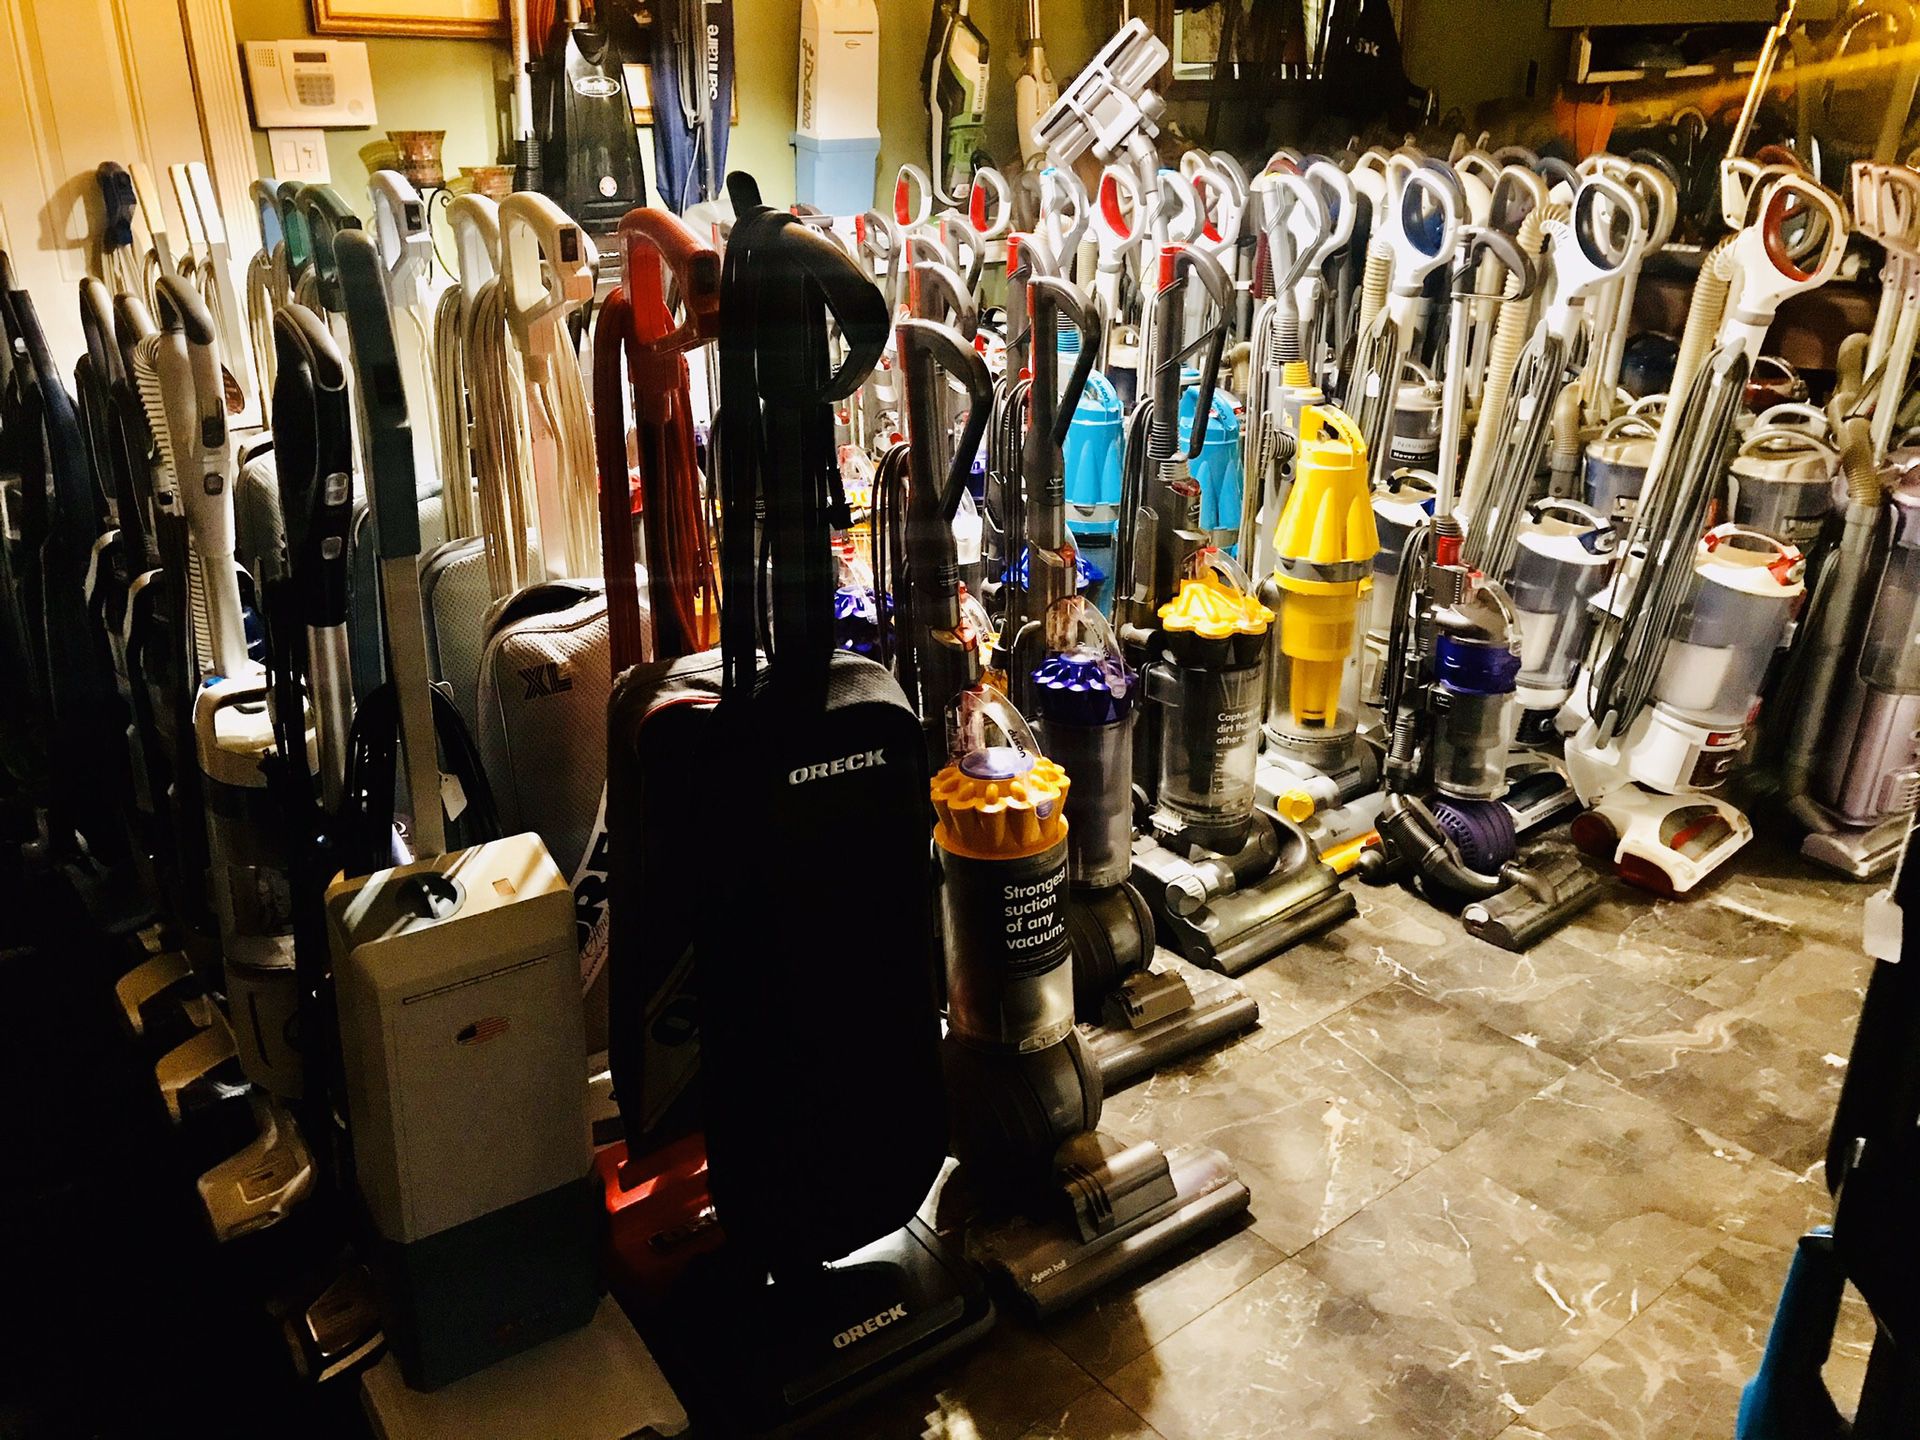 Reconditioned Name Brand Vacuum Cleaners